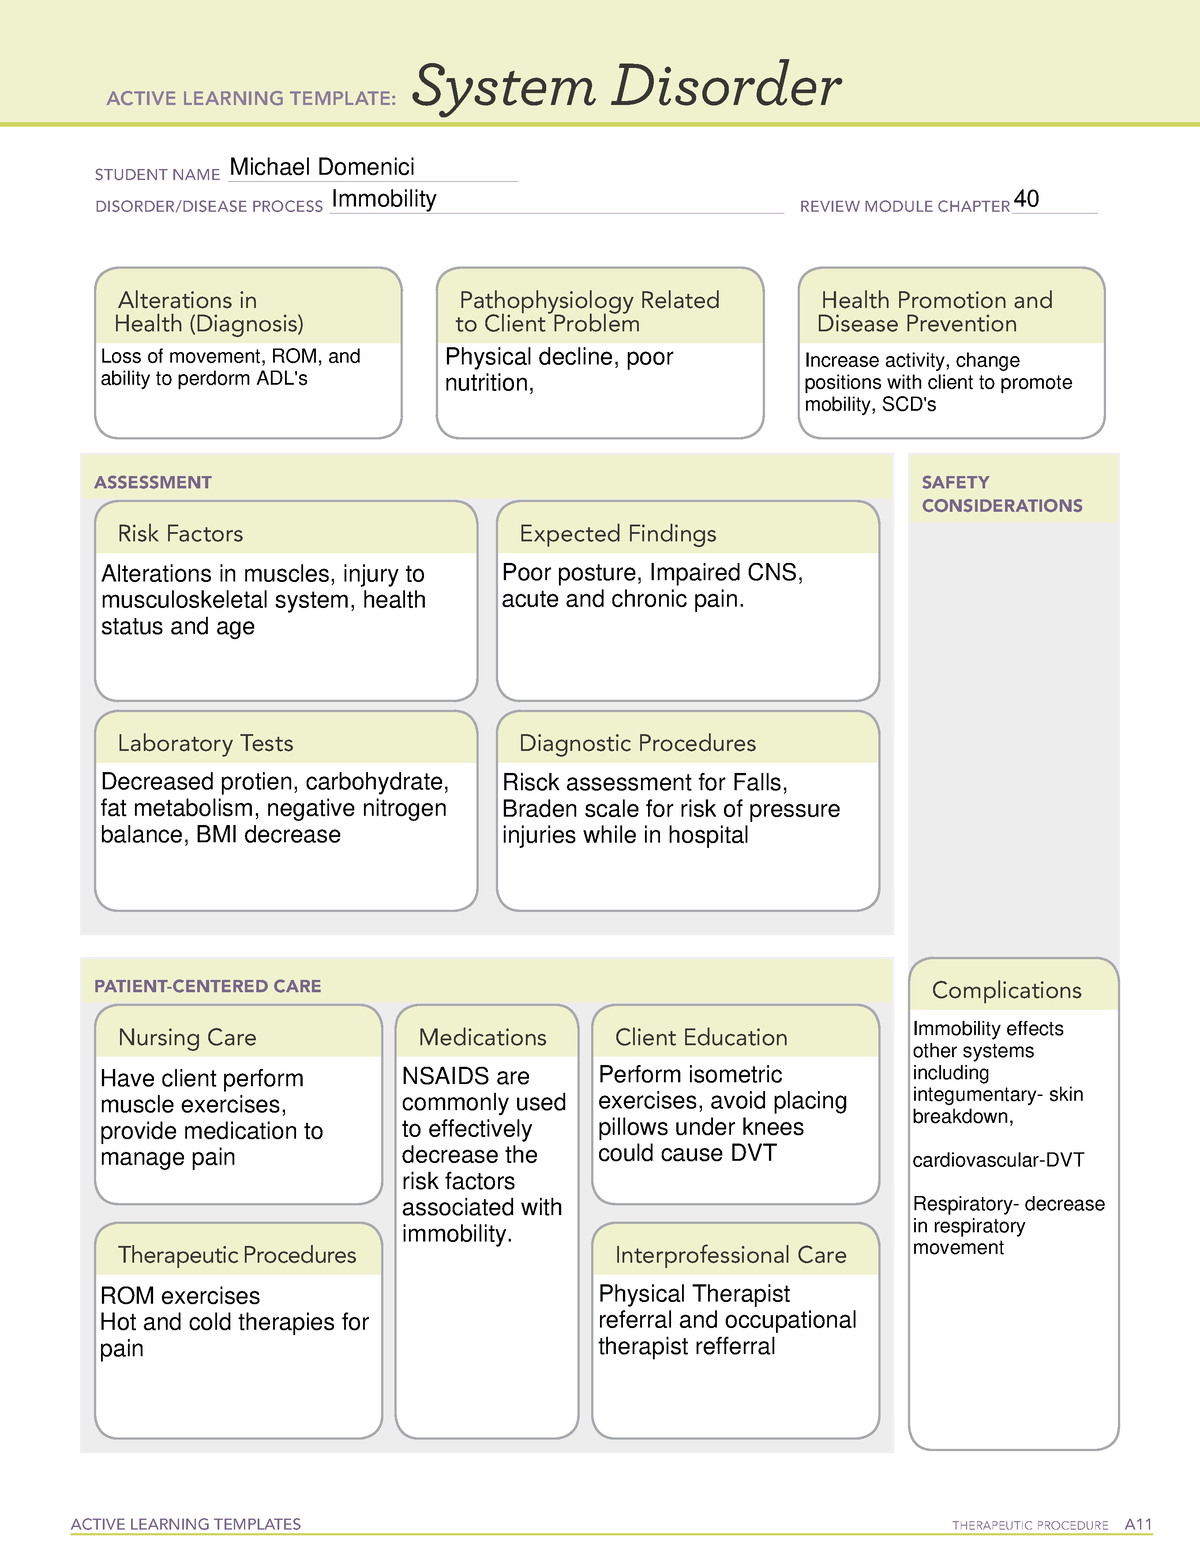 Active Learning Template System Disorder 3 - ACTIVE LEARNING TEMPLATES ...